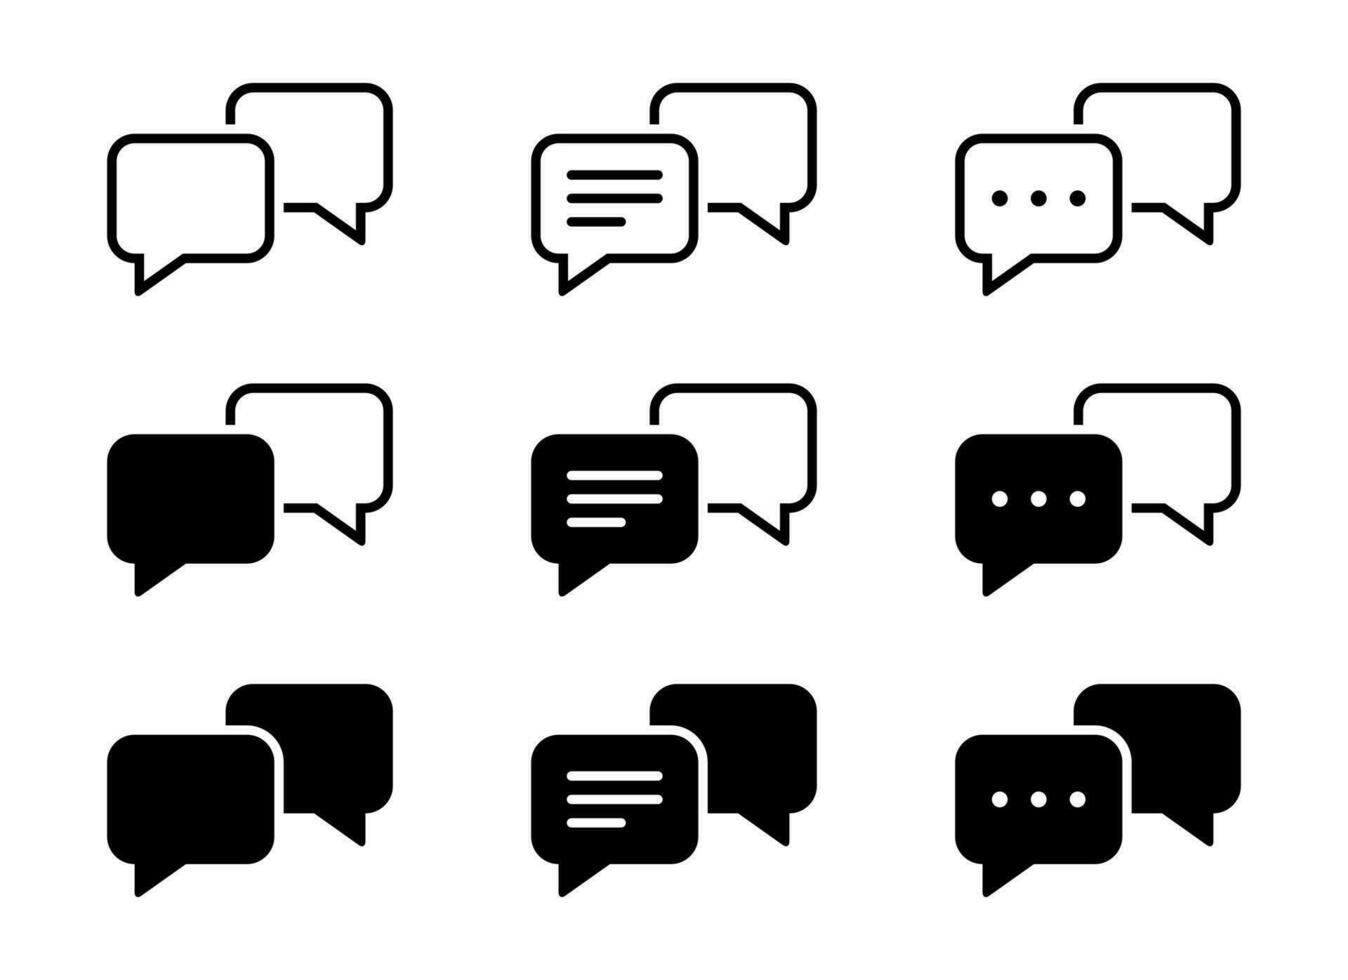 Text message icon vector set collection. Speech bubble symbol in trendy style